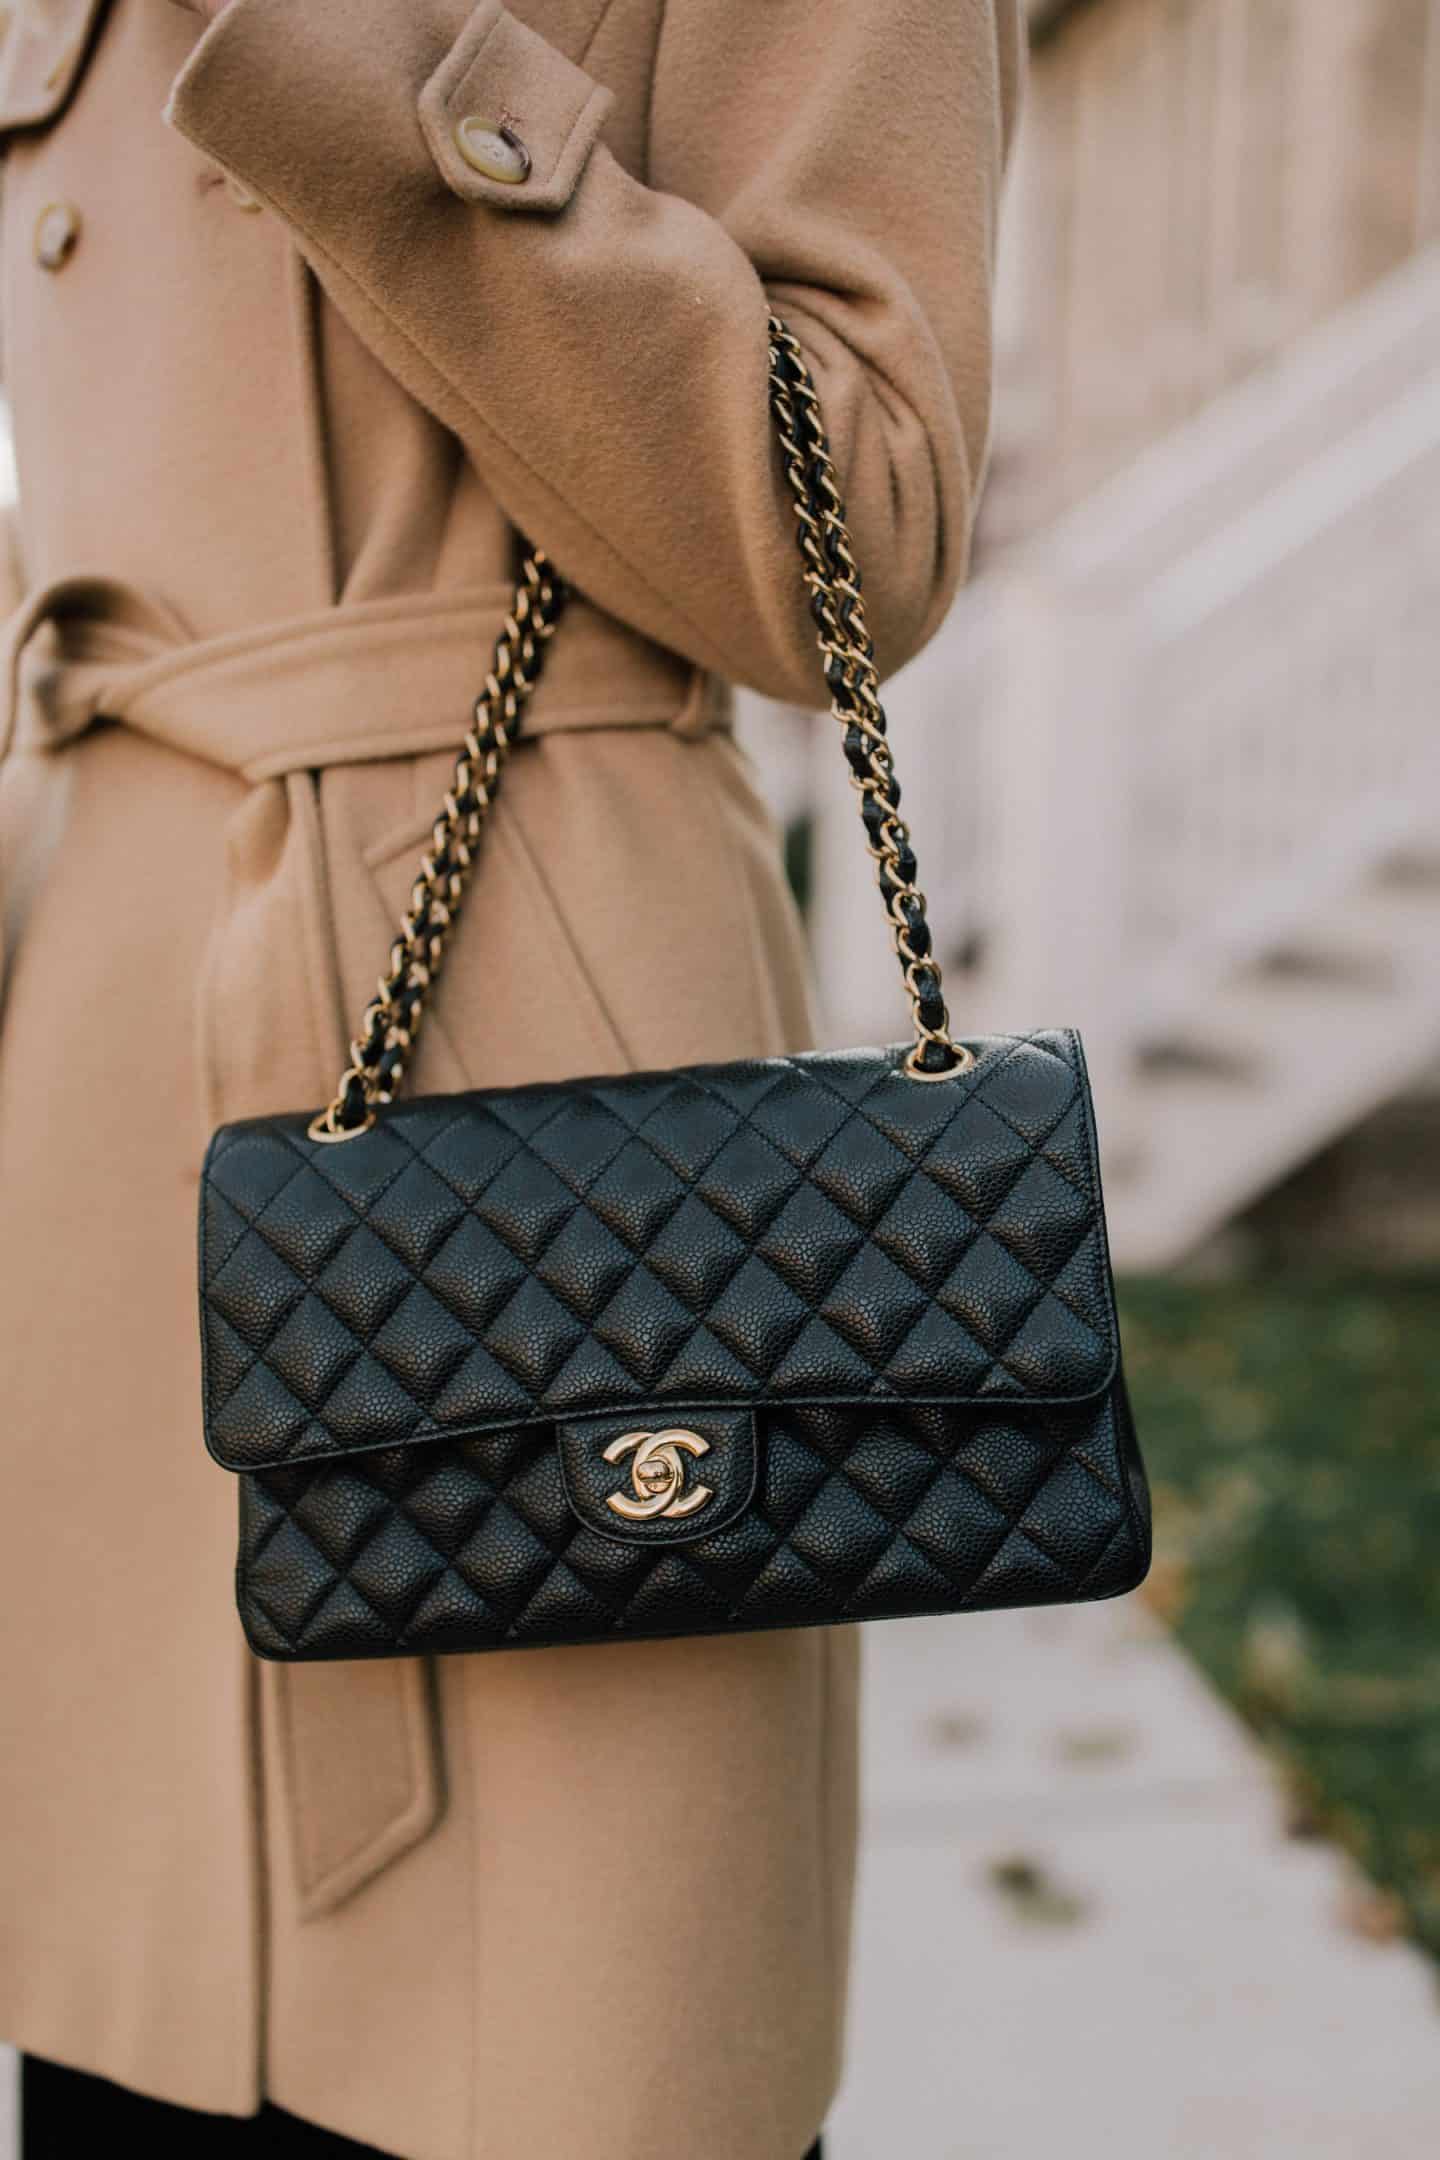 Chanel Handbags: Timeless Chic, French Haute Couture, and the Iconic Quilted Design